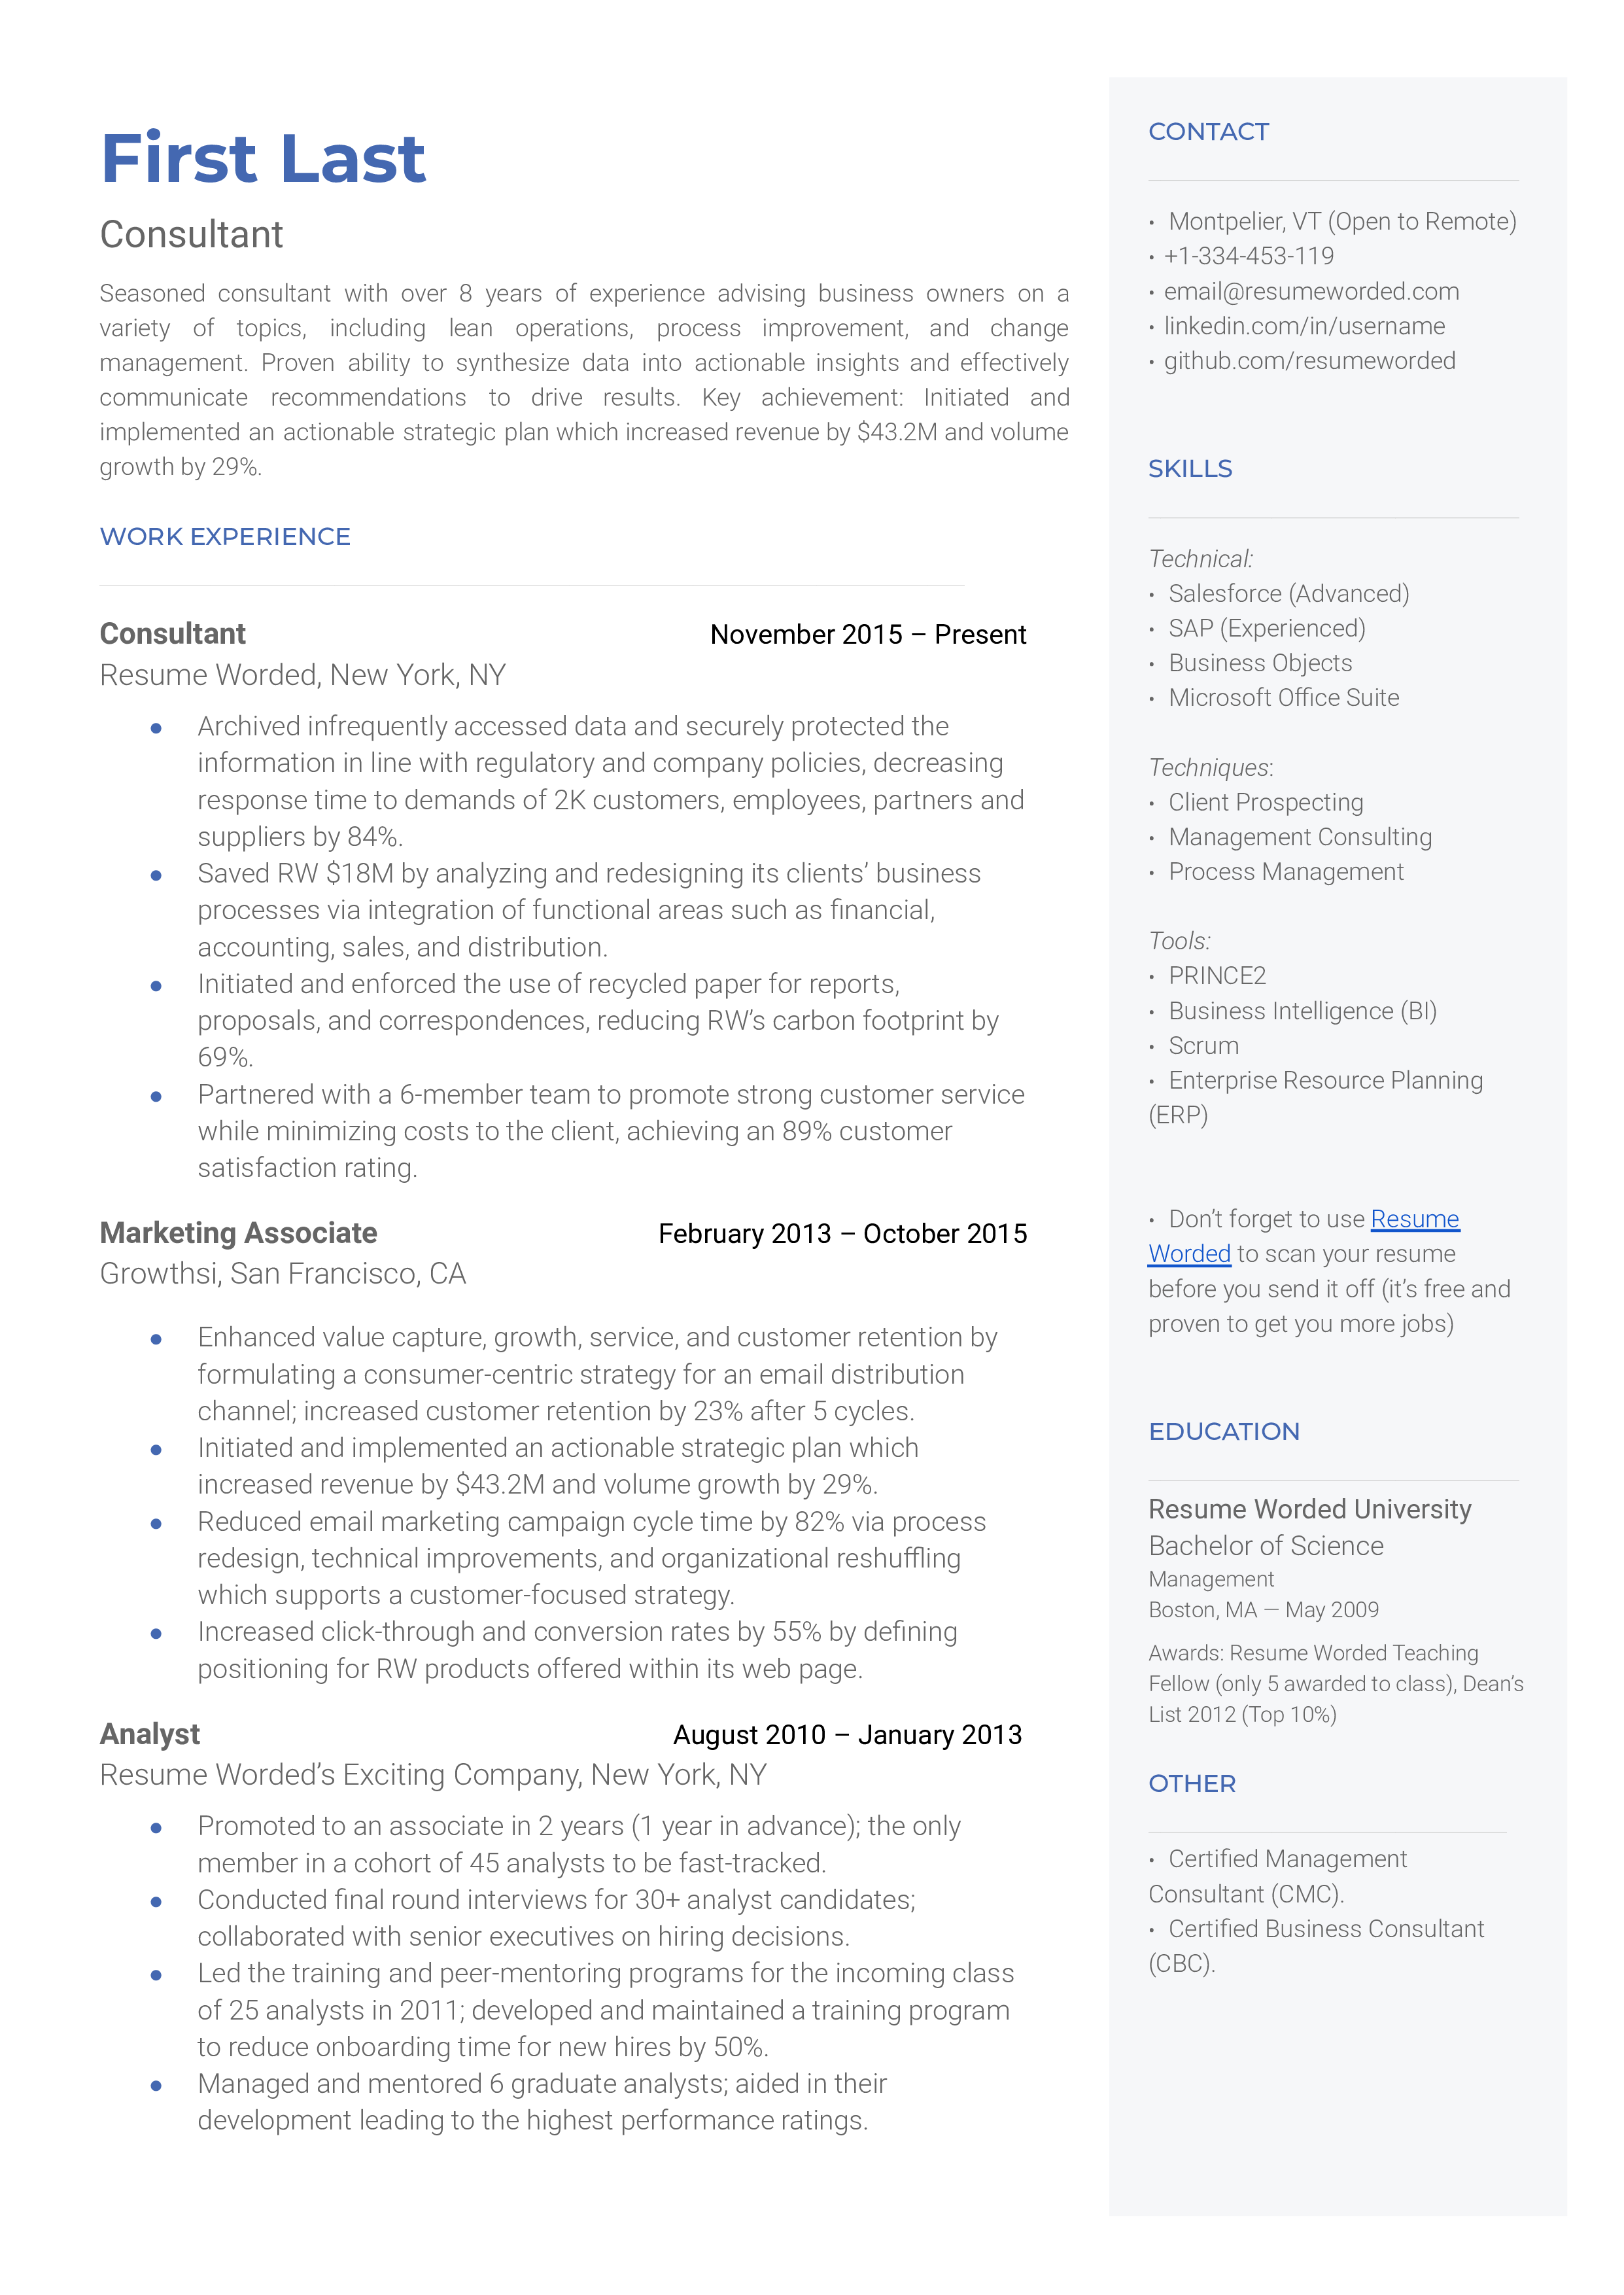 A CV screenshot for a consultant role showcasing technical expertise and client success stories.